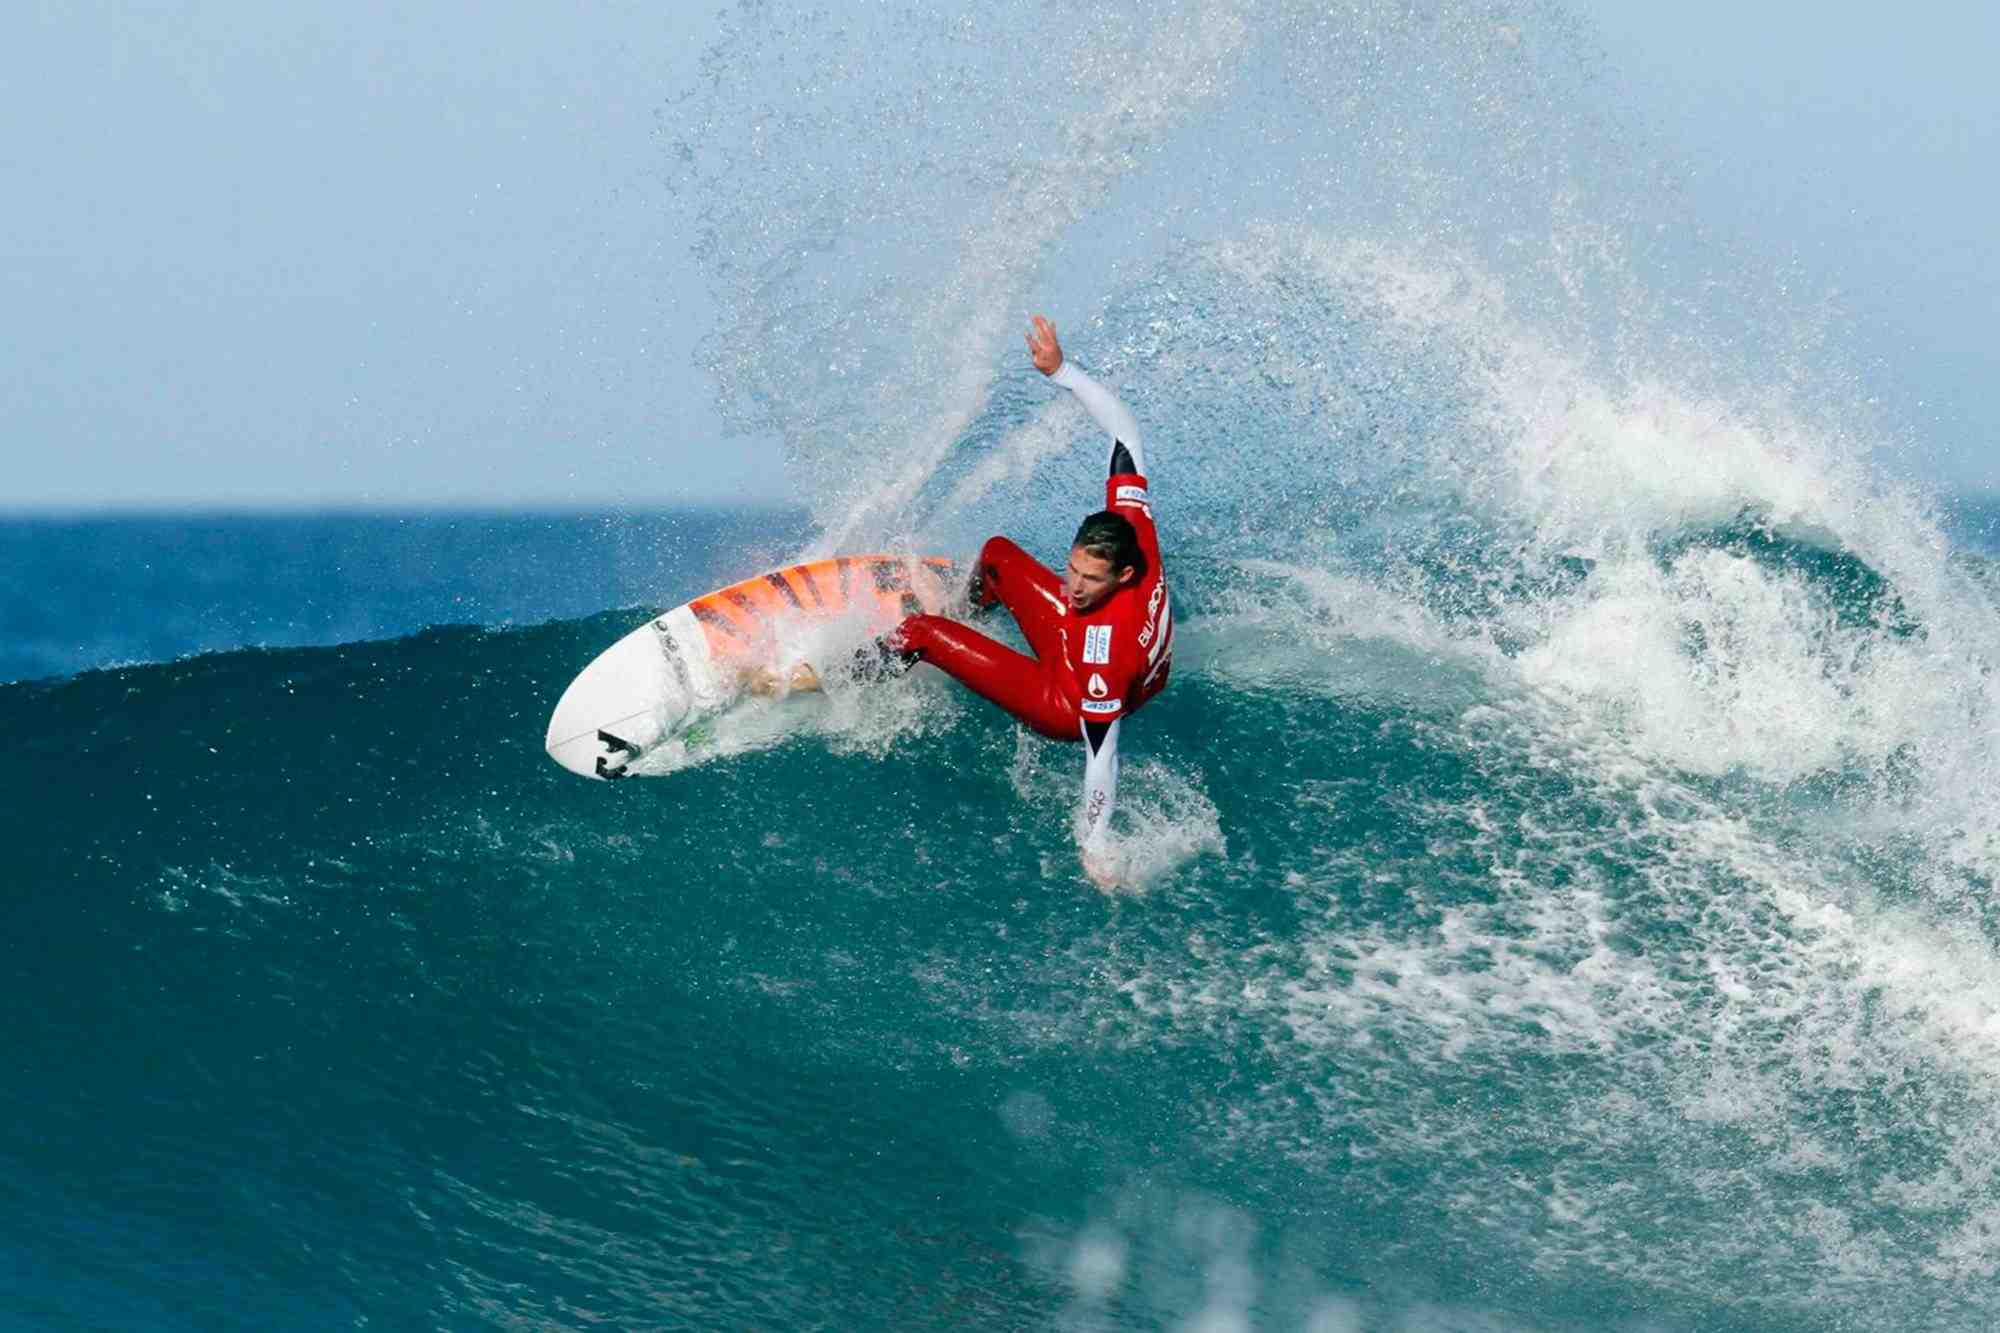 What happened to Bruce Irons?